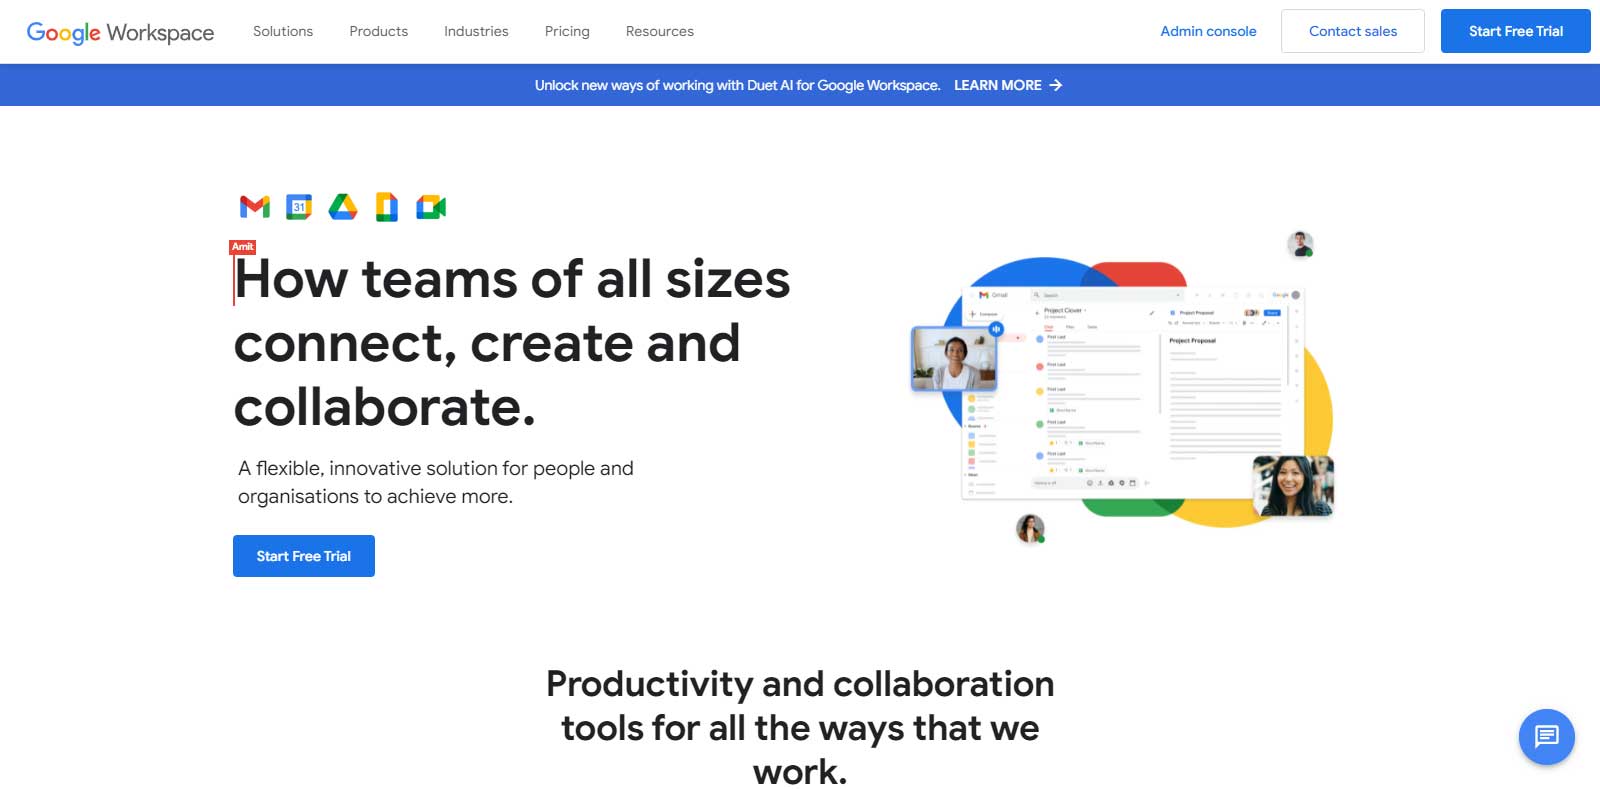 Google Workspace - Business Apps & Collaboration Tools